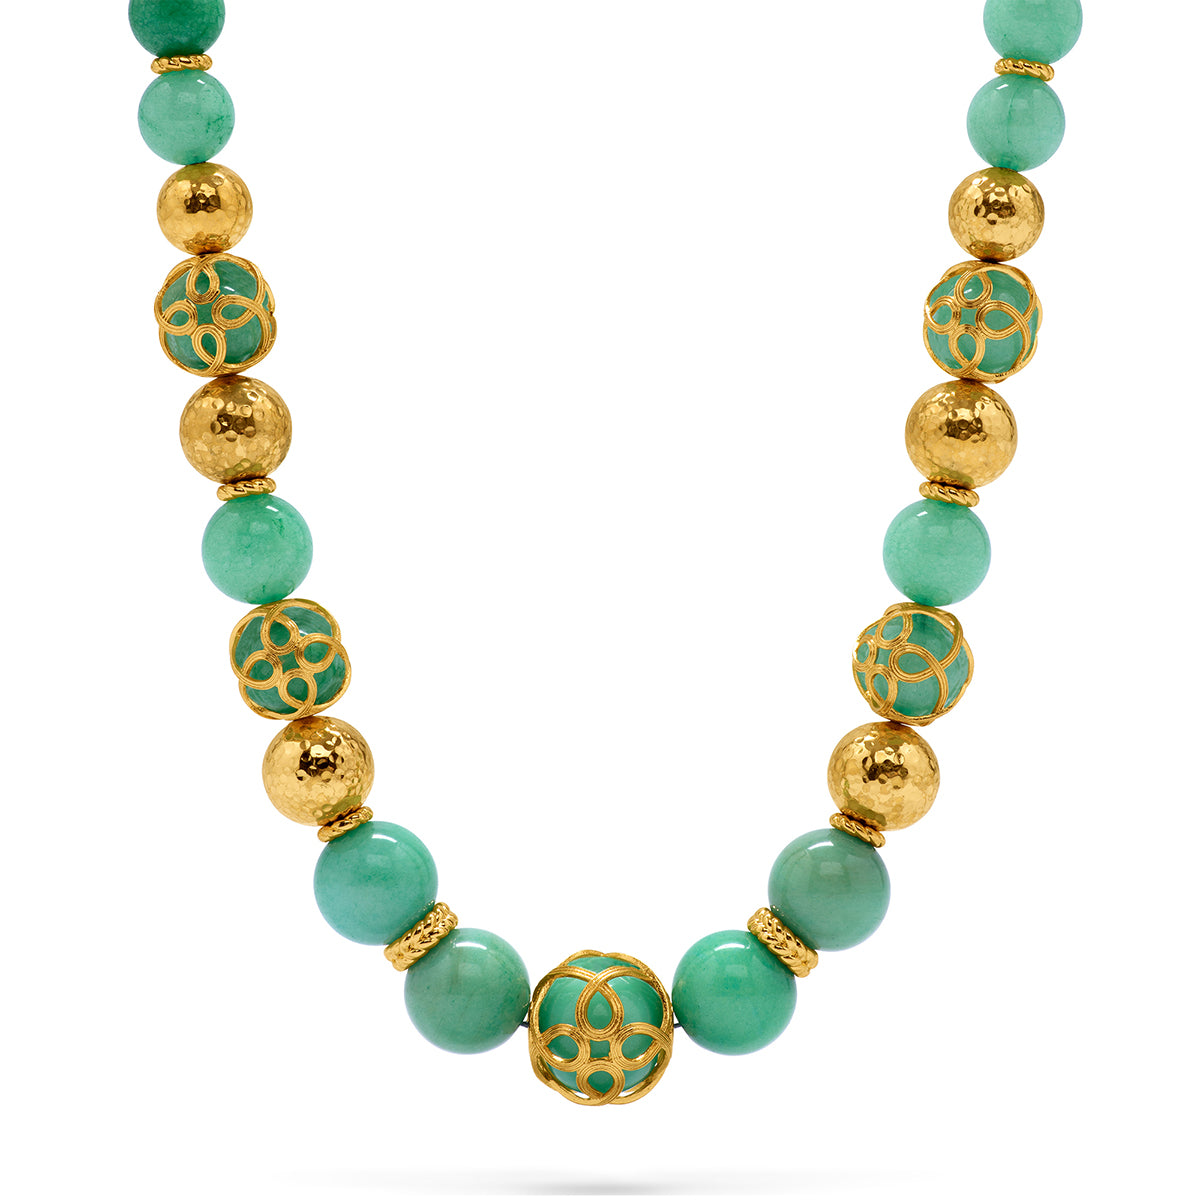 Elizabetta Cage bead necklace made with gold and green apple jade.